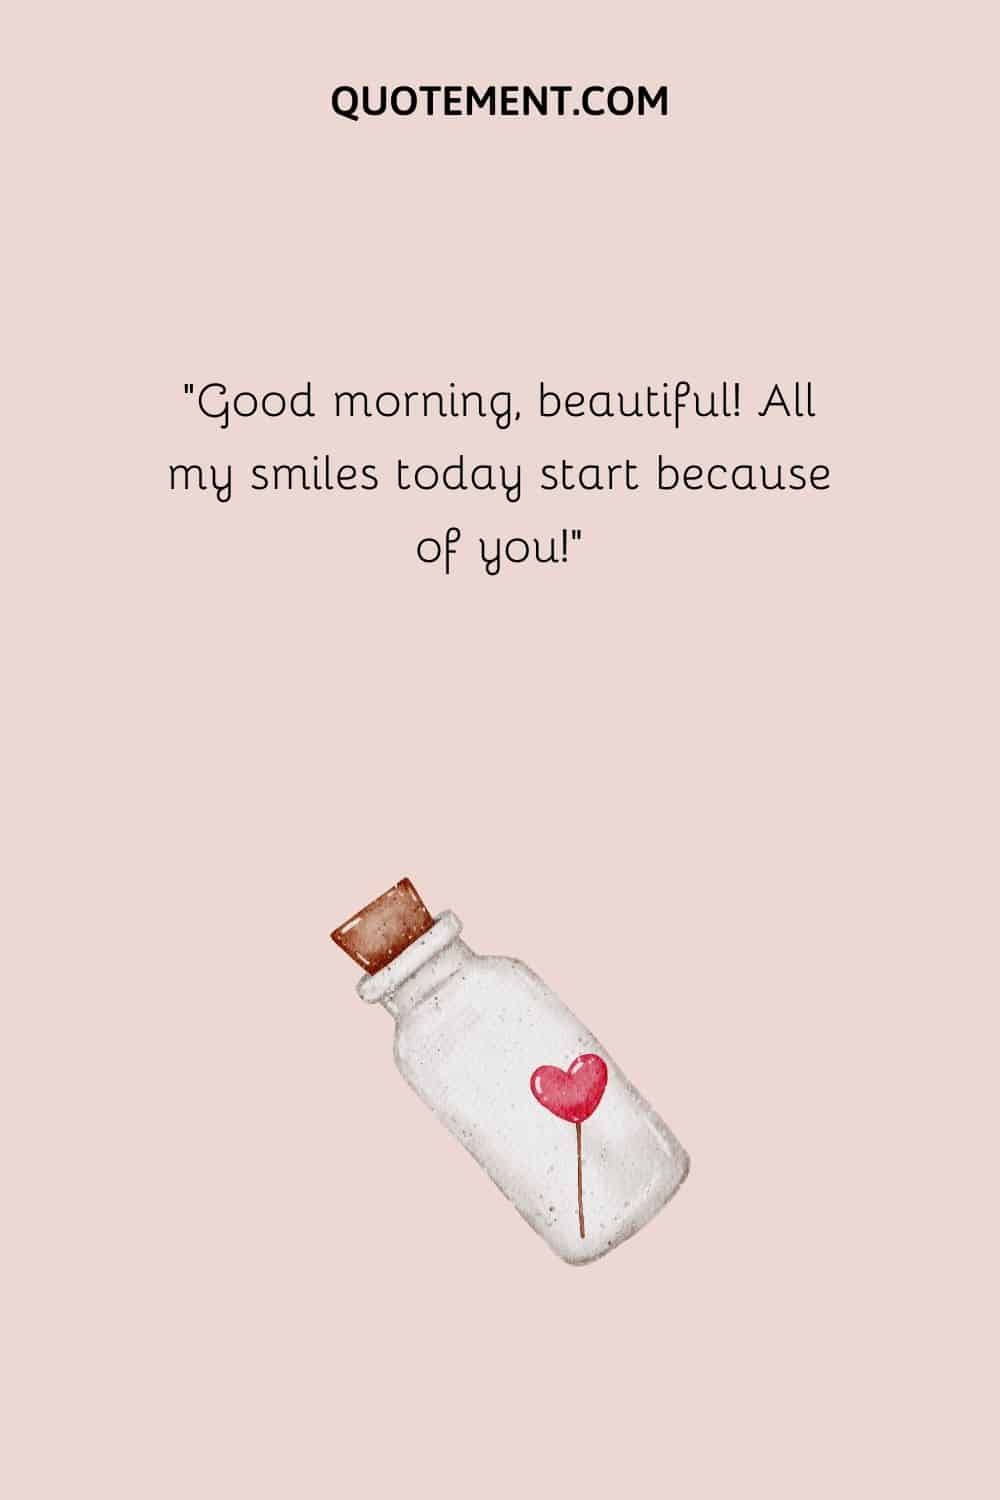 Good morning, beautiful! All my smiles today start because of you!